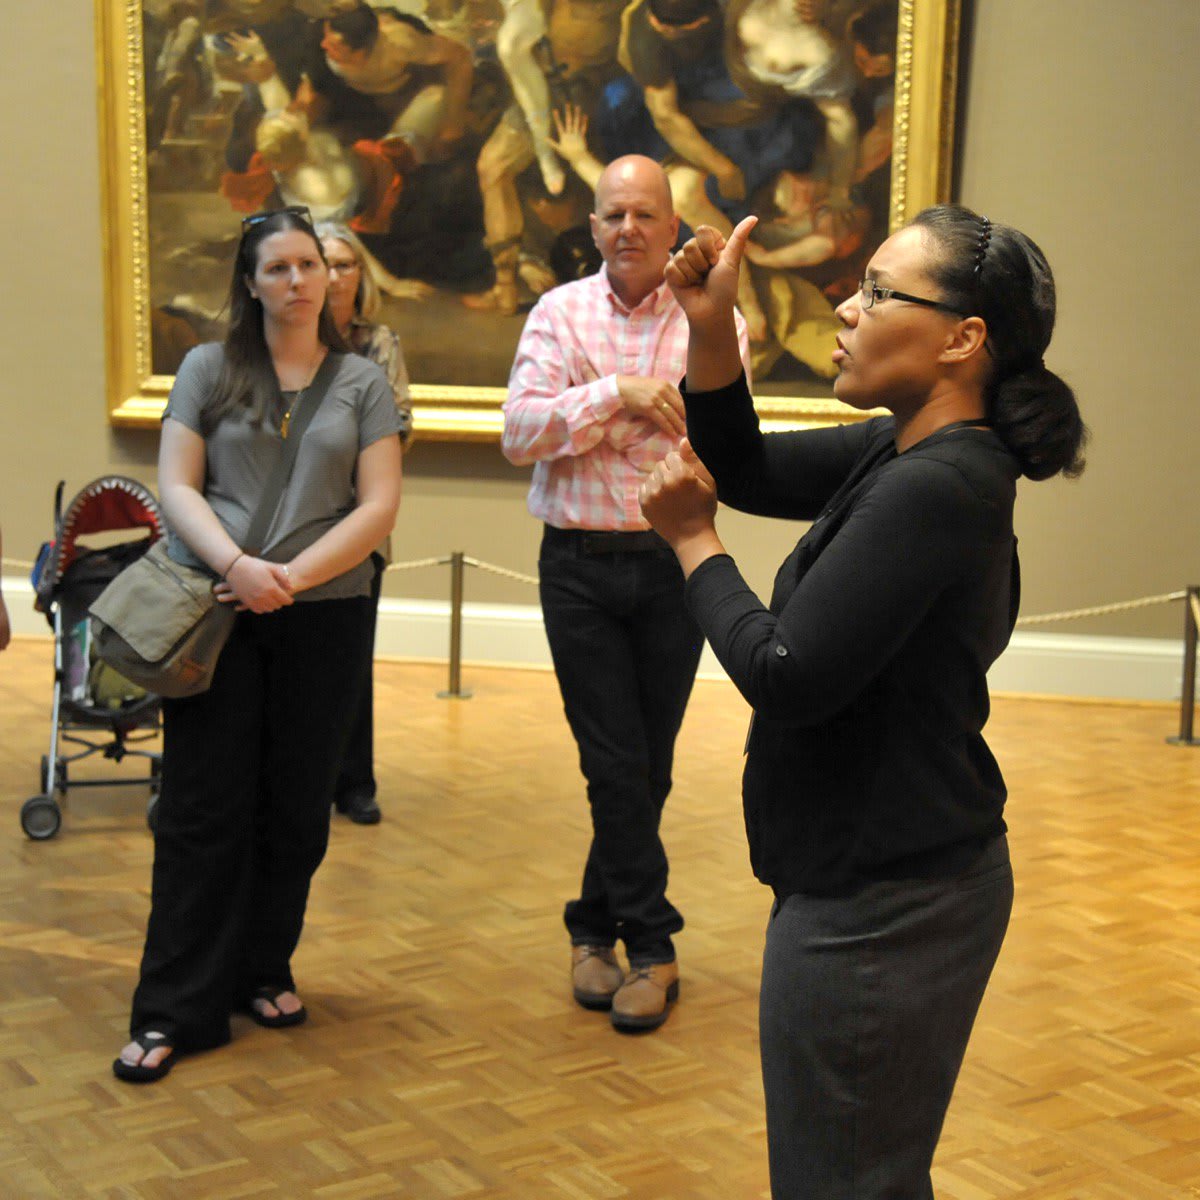 TOMORROW—Join us on an interactive tour of works in the collection led by a museum educator in American Sign Language. Free to IL residents—https://t.co/cnatVcjbzX